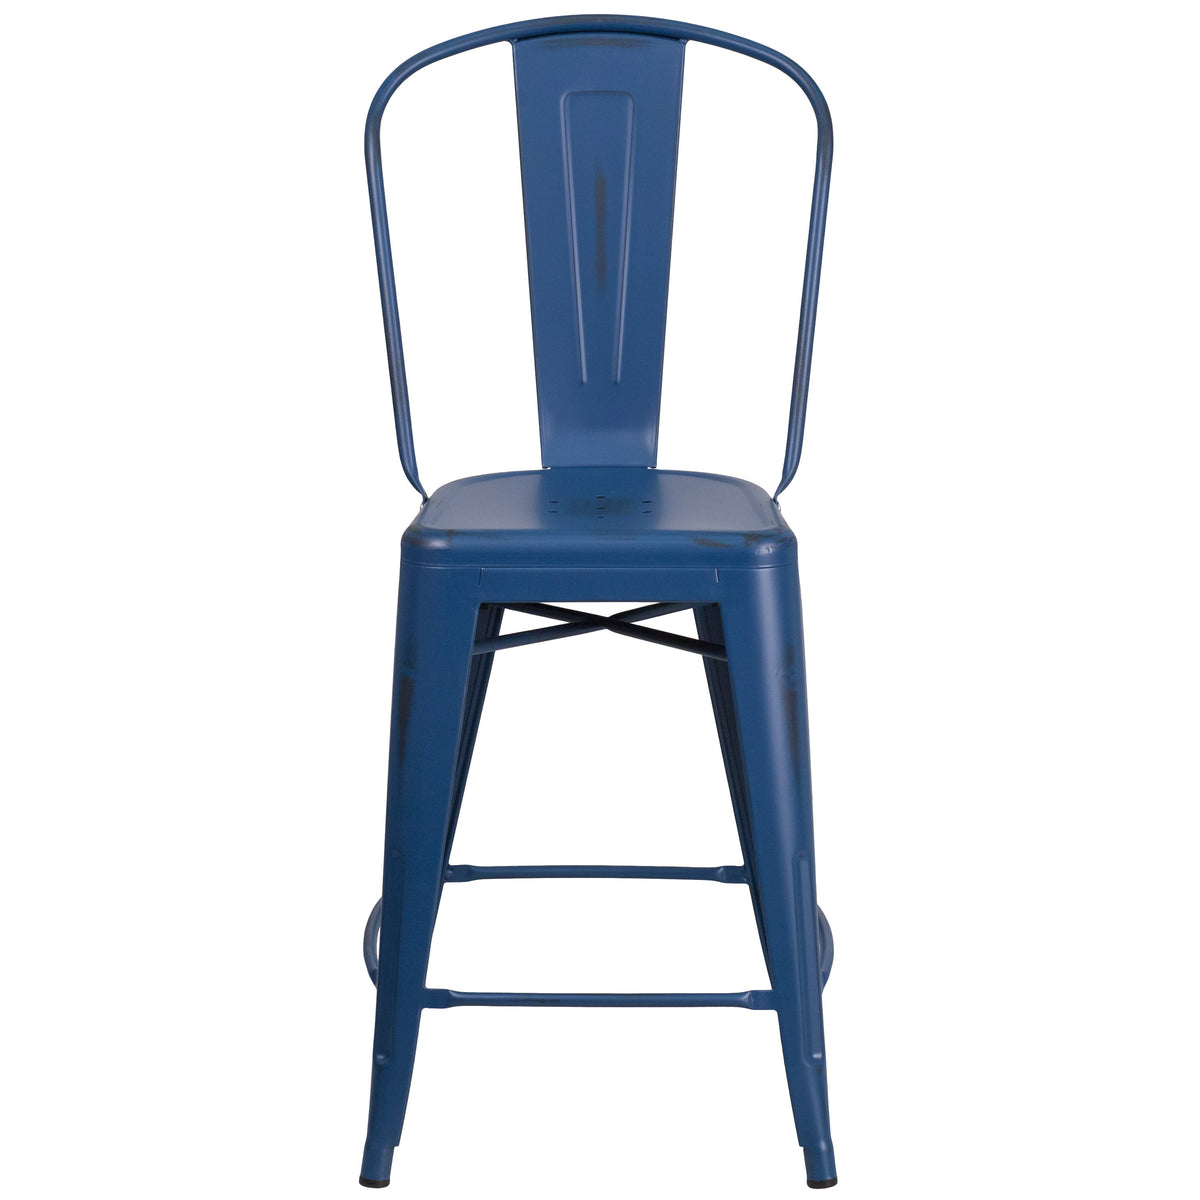 Antique Blue |#| 24inch High Distressed Aged Blue Metal Indoor-Outdoor Counter Height Stool w/ Back